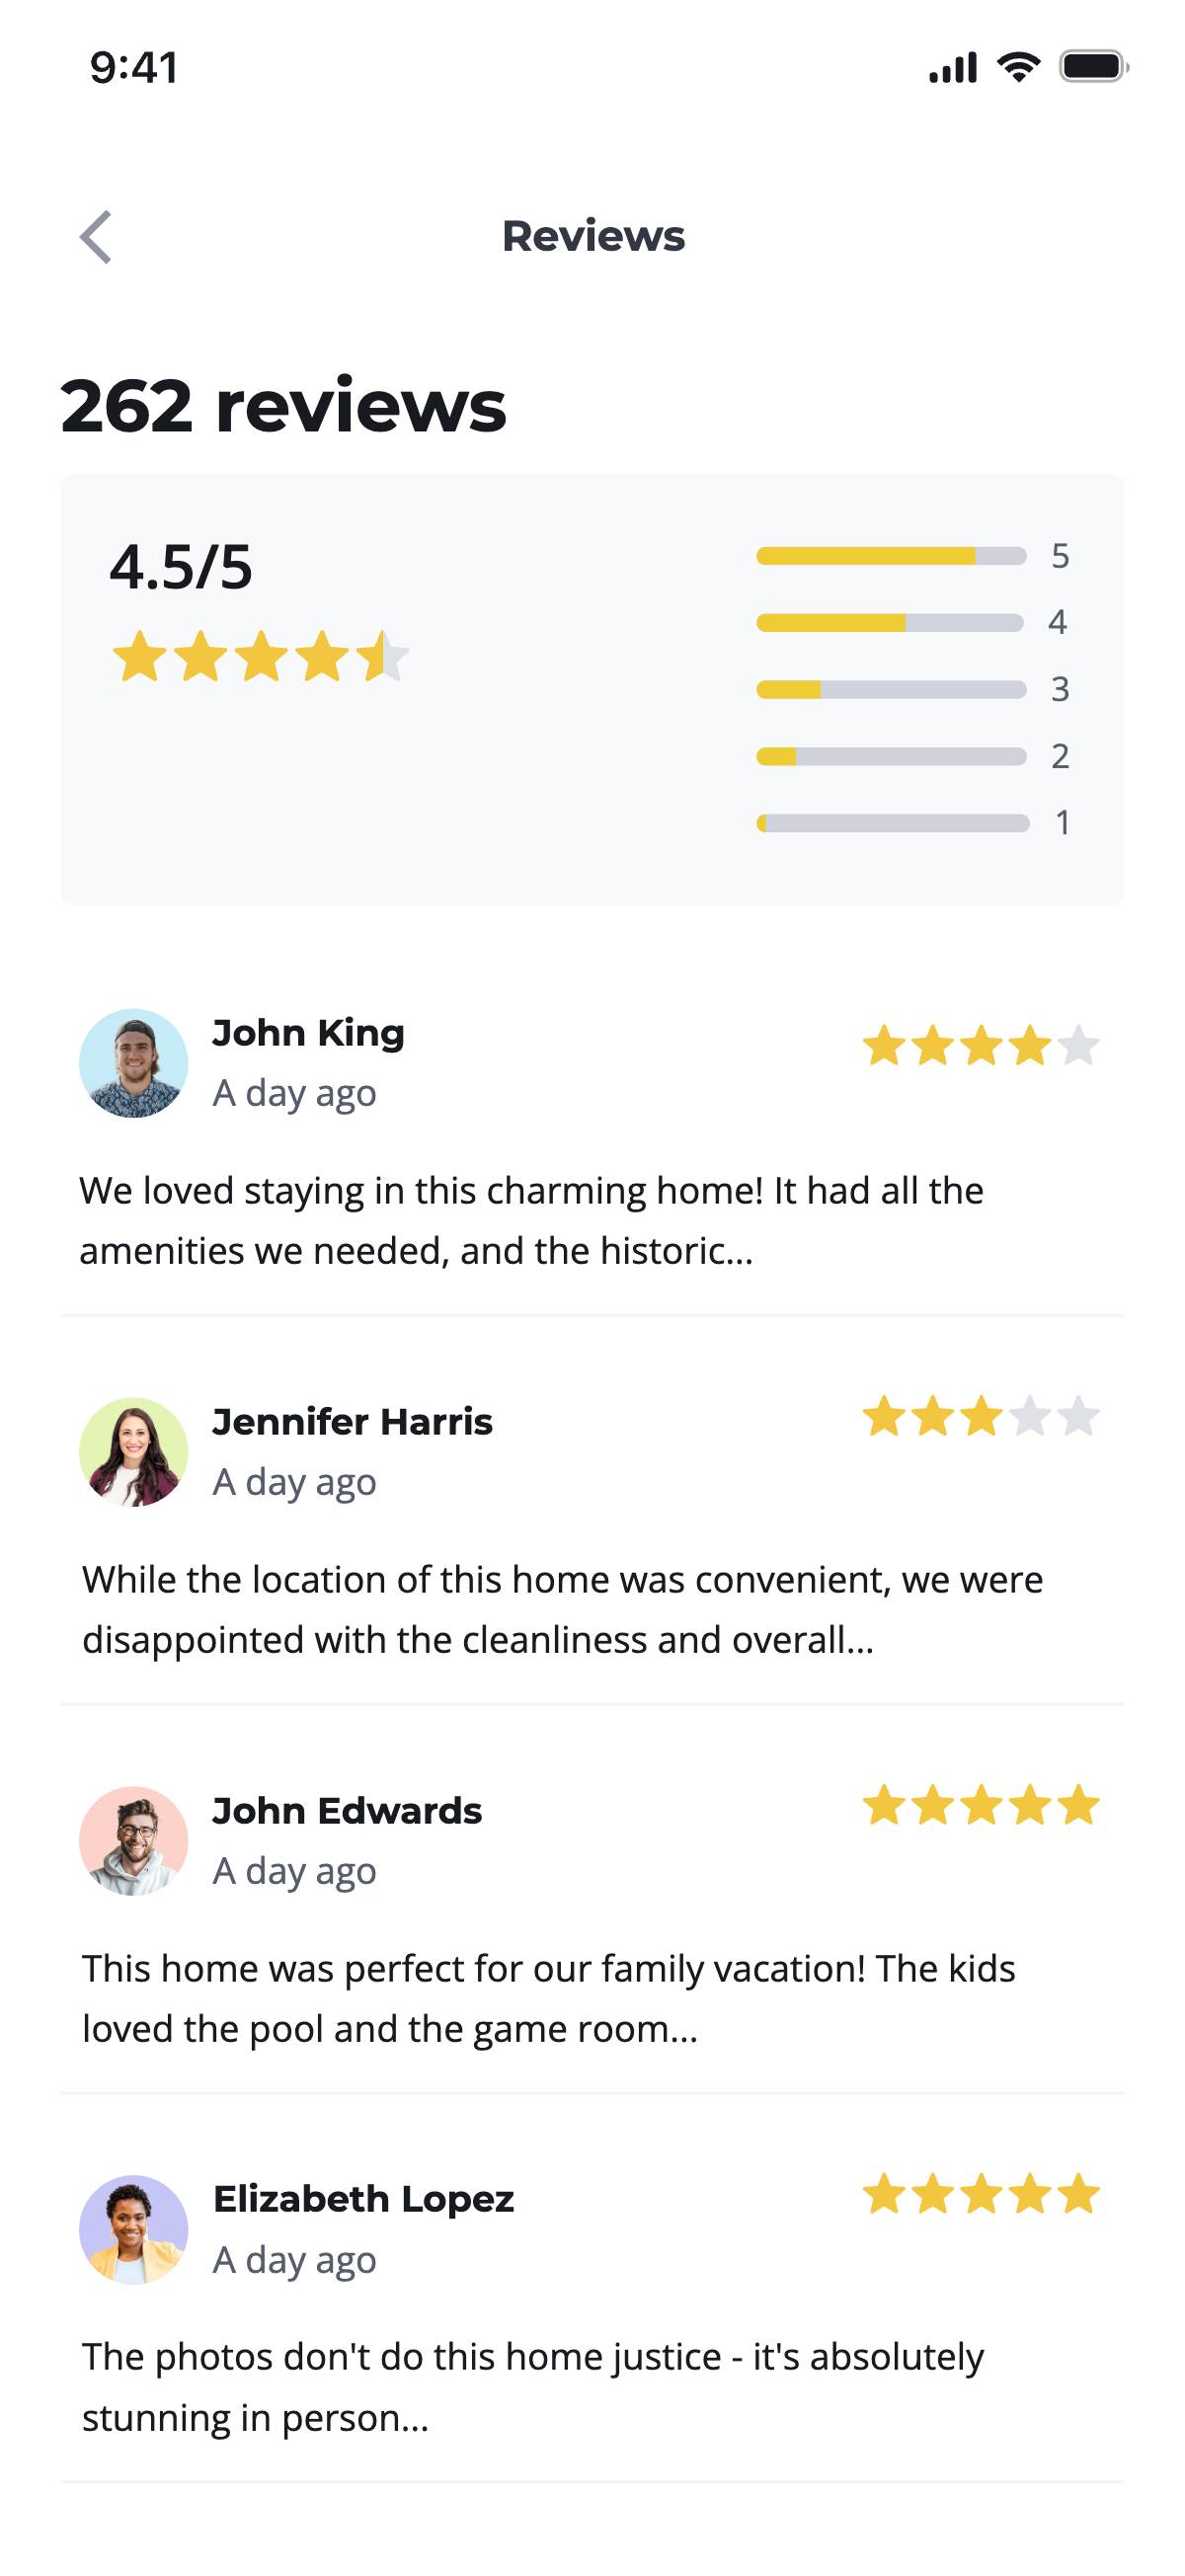 House details - All reviews